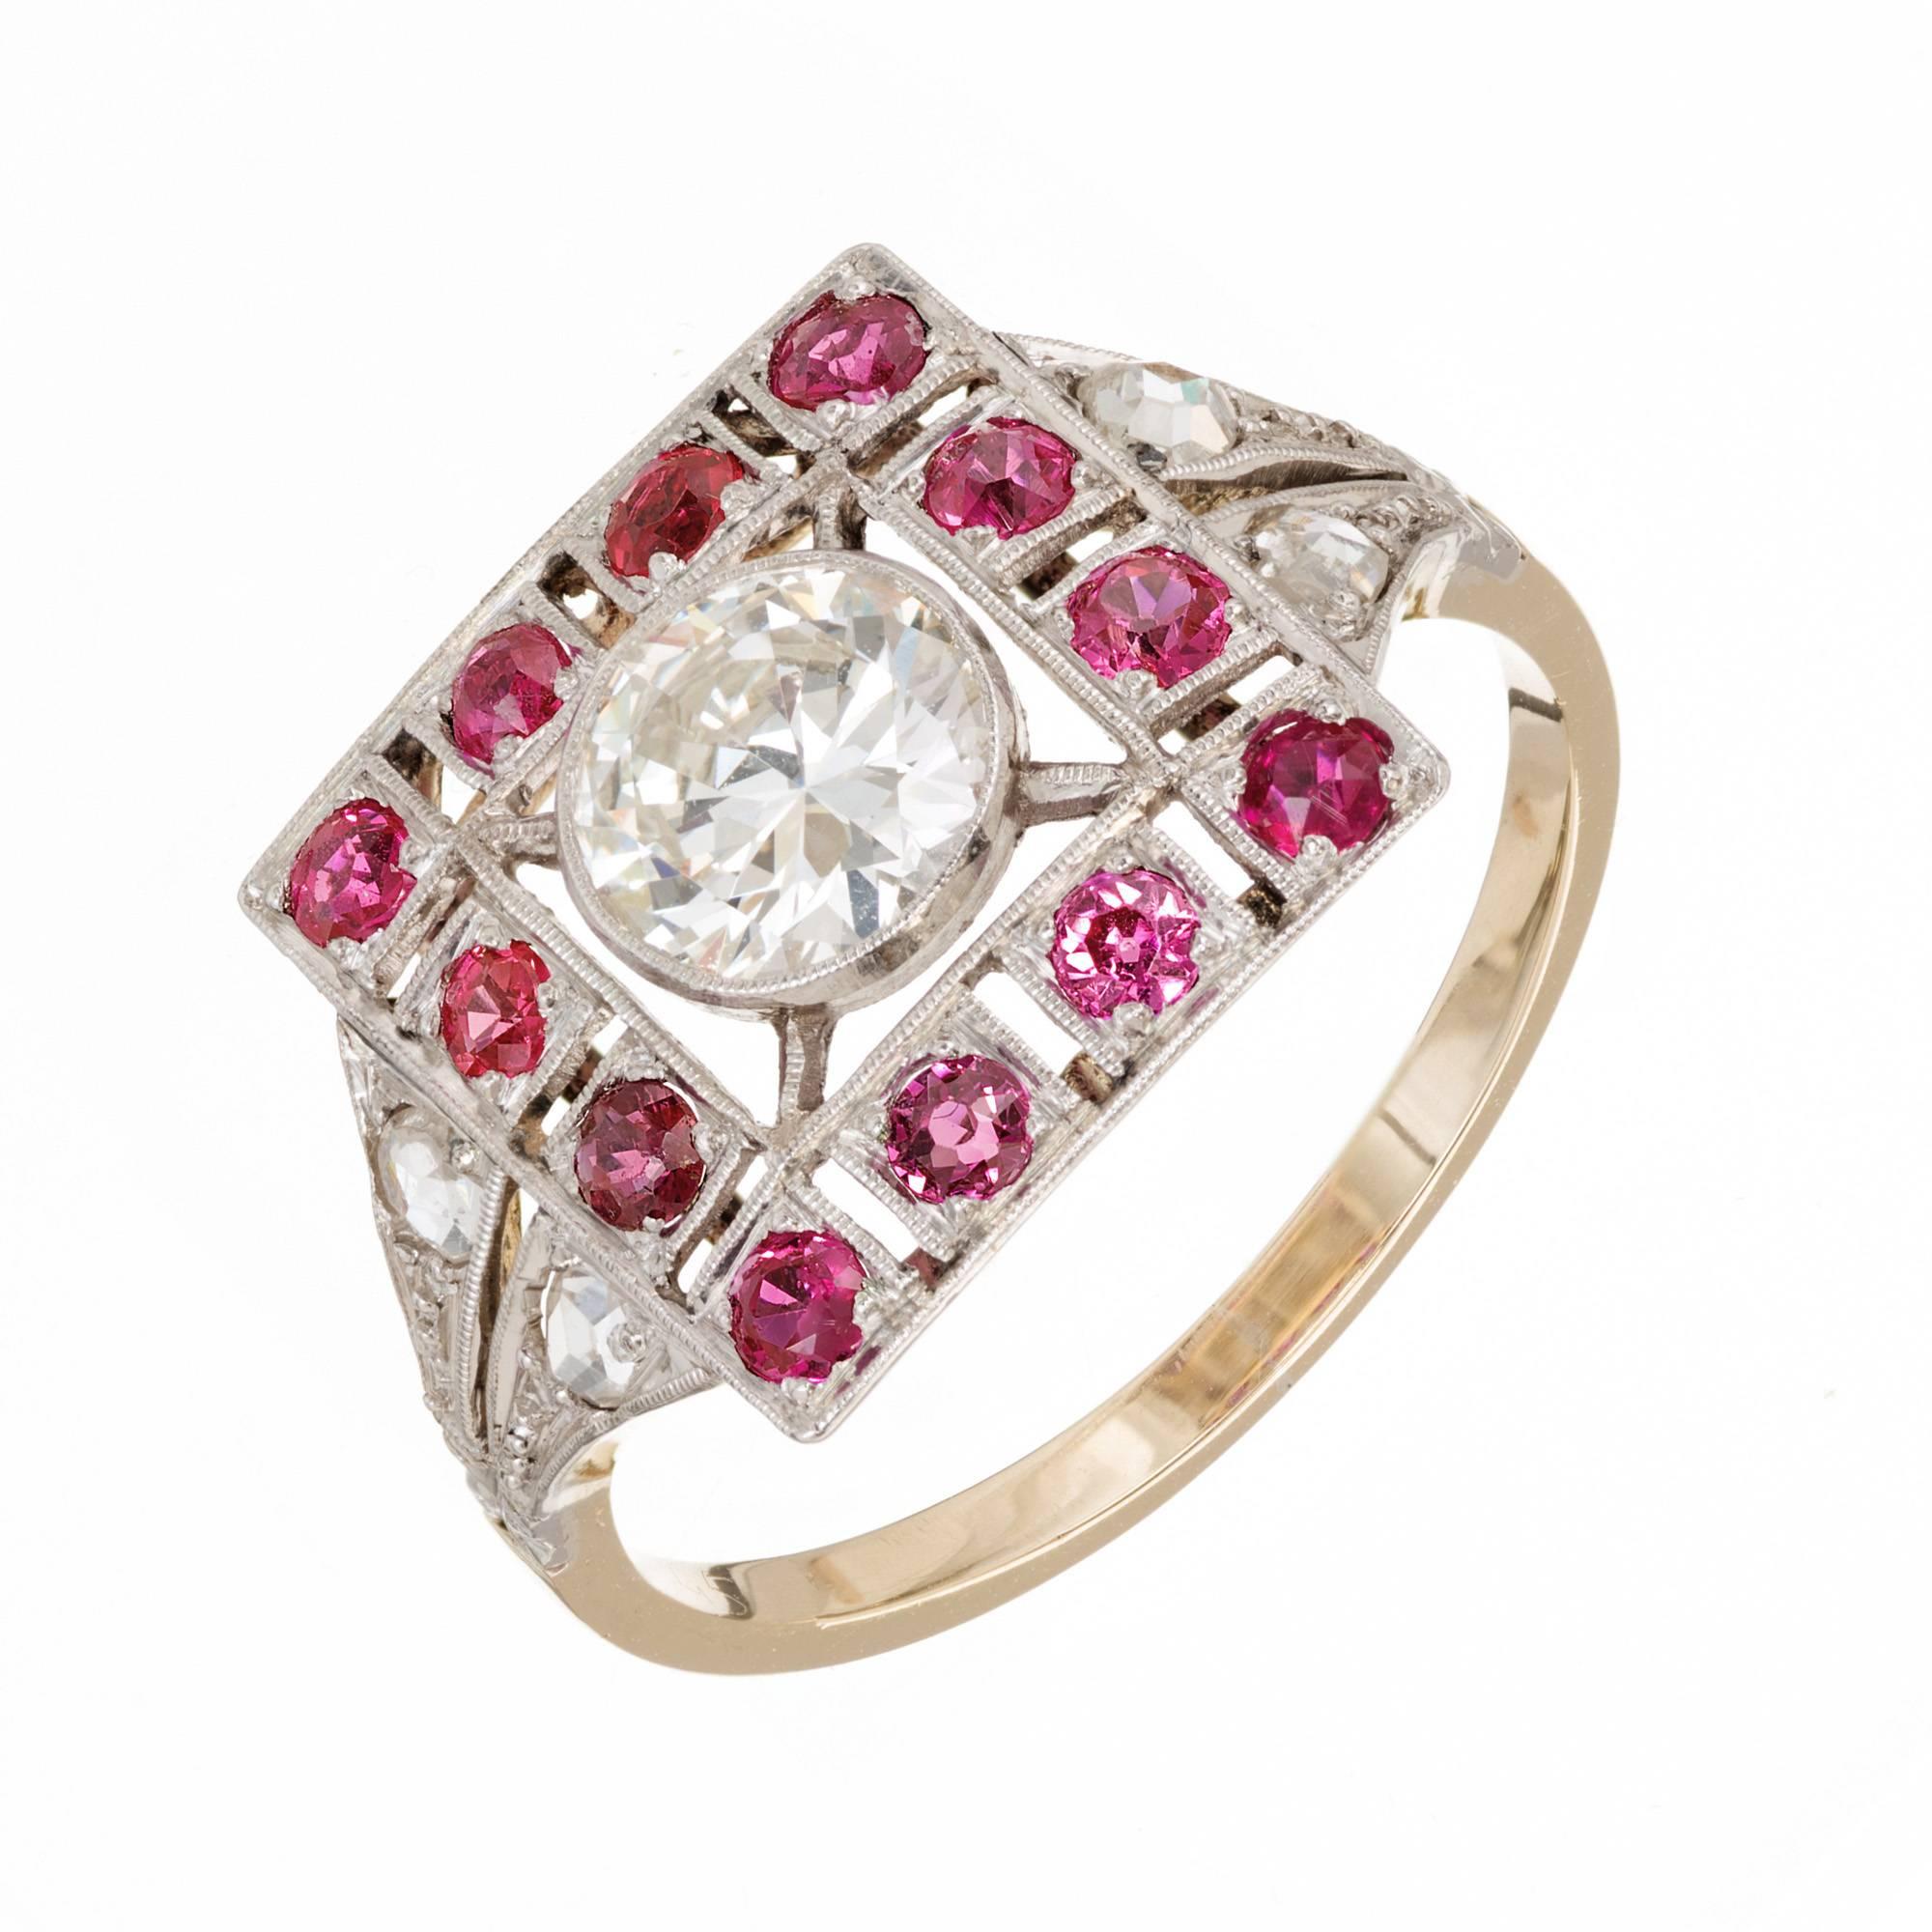 Vintage 1930s Art Deco handmade cocktail ring with an 18k yellow gold base and Platinum top set with a bright sparkly center transitional cut diamond in an open work square top with natural bright pinkish red Rubies and rose cut Diamonds. 

1